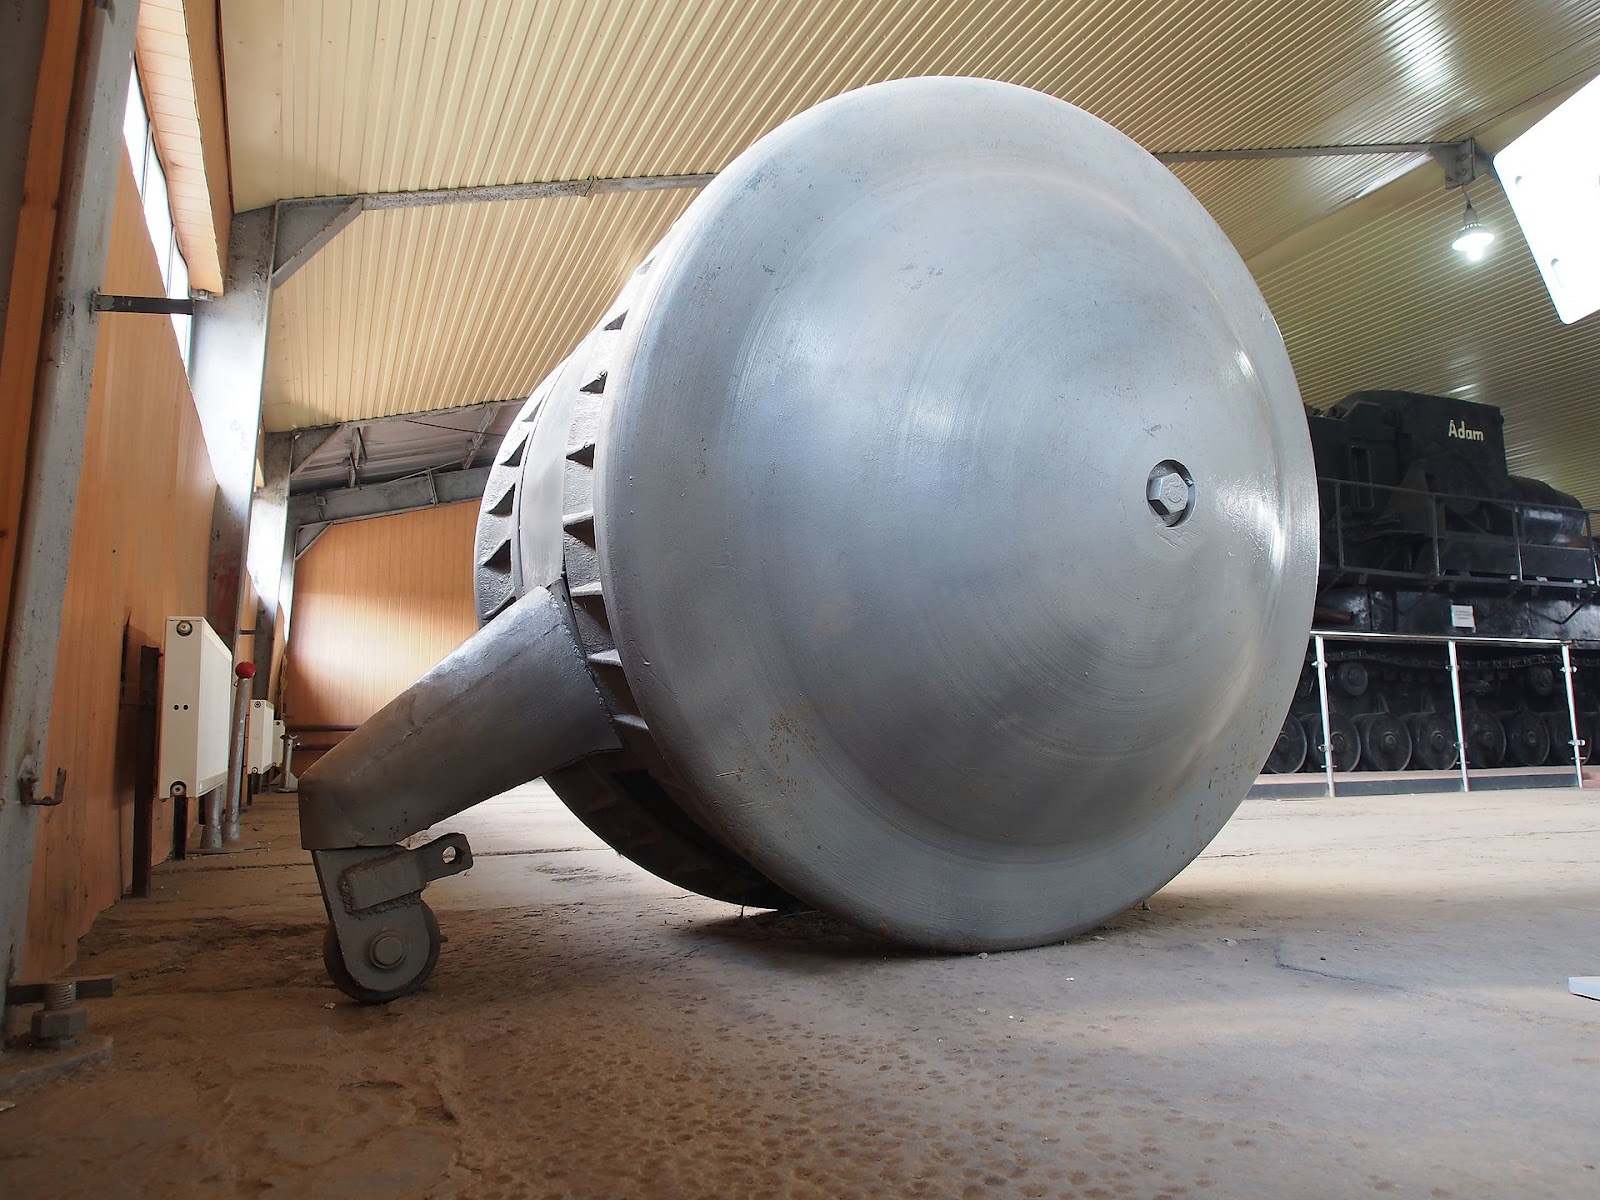 Germany's Kugelpanzer, or rolling tank, which was designed for a single occupant. Image via Wikimedia Commons.